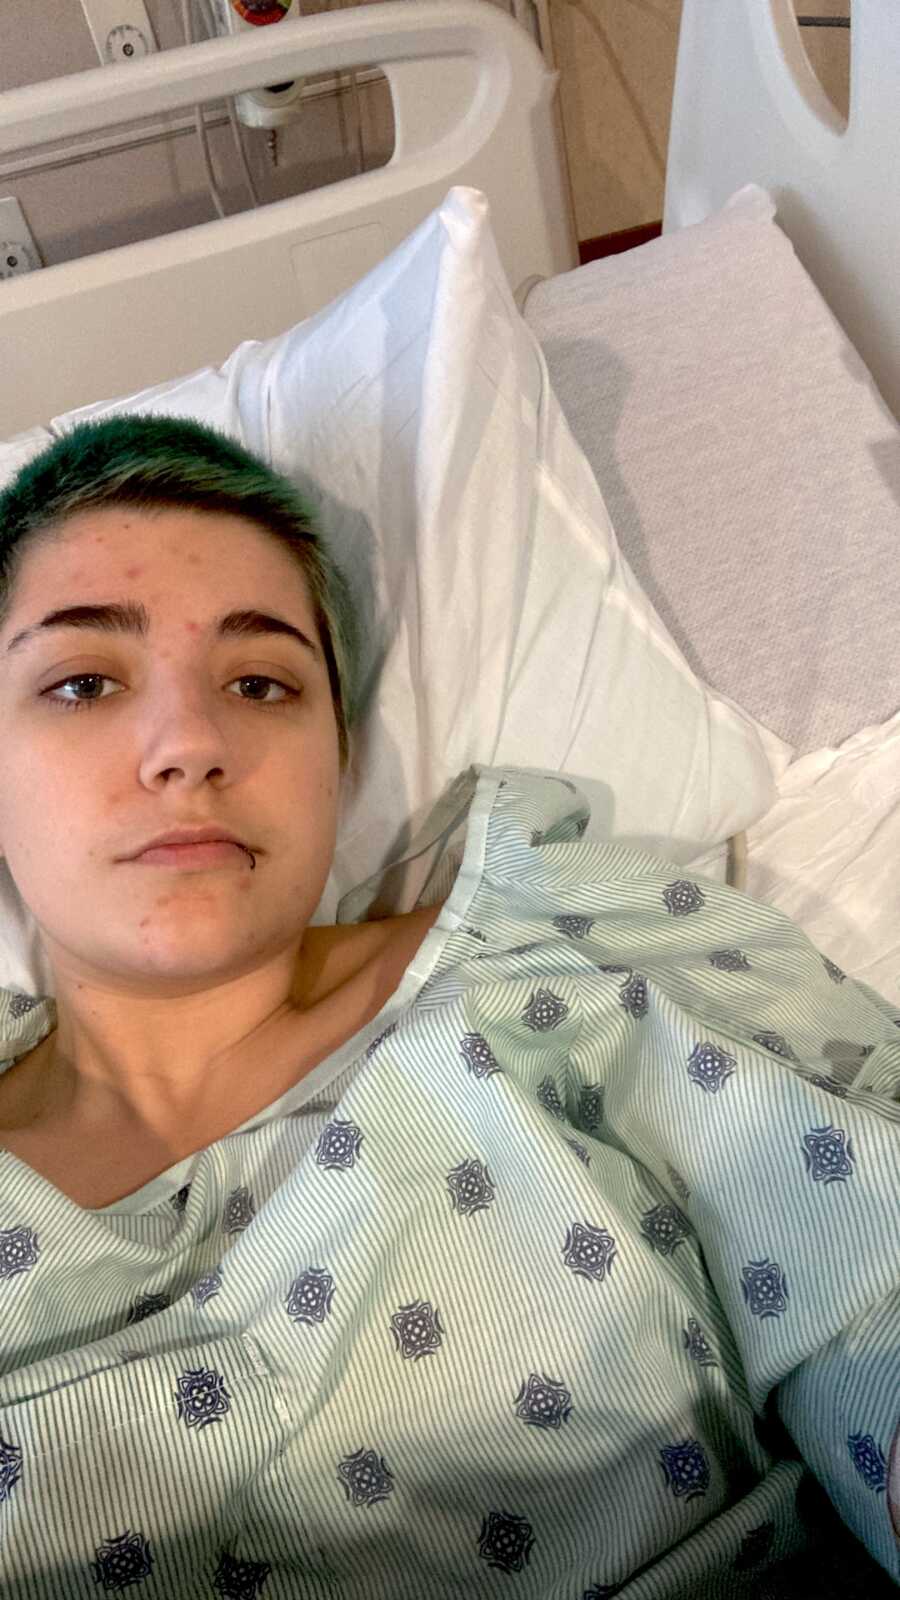 chronic illness warrior laying in hospital bed in hospital gown